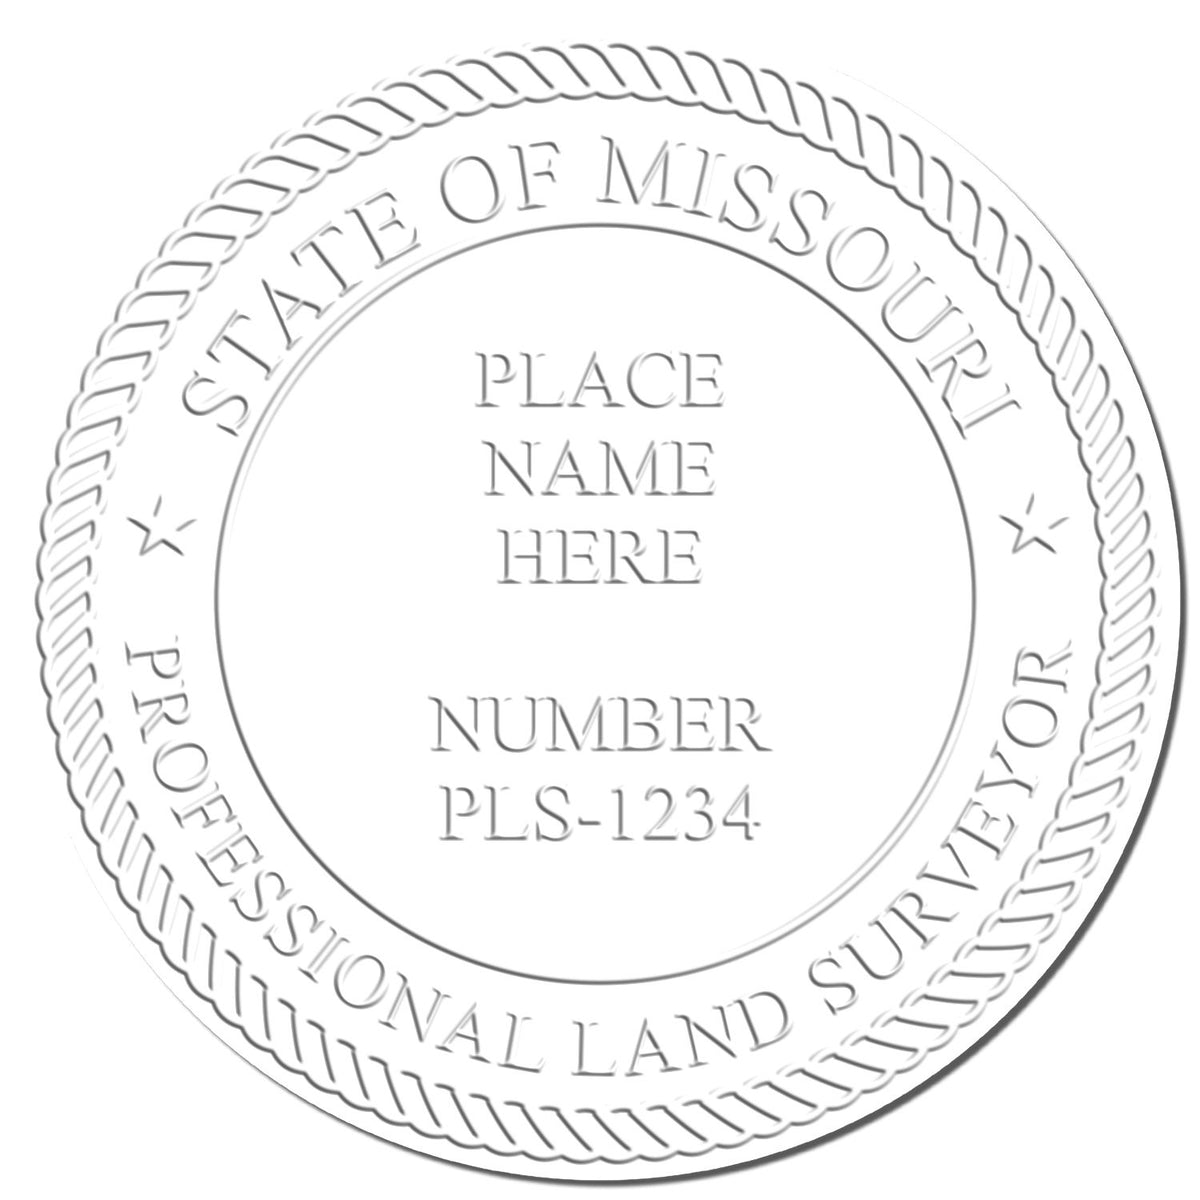 This paper is stamped with a sample imprint of the Missouri Desk Surveyor Seal Embosser, signifying its quality and reliability.